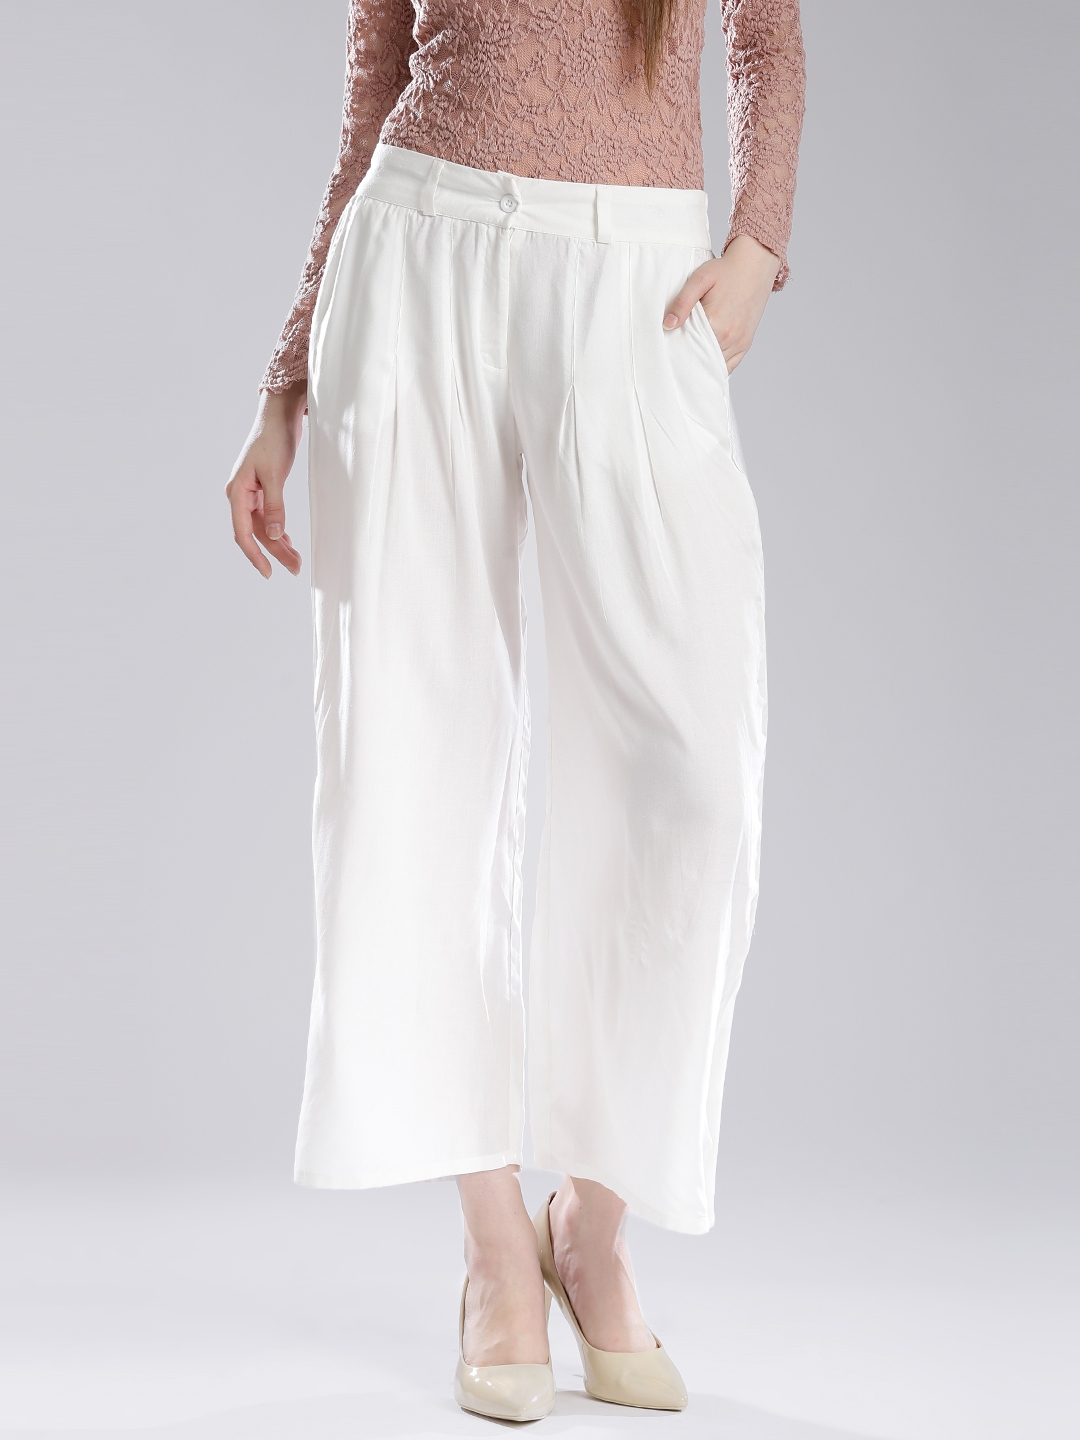 Palazzo Trousers  Buy Palazzo Trousers Online in India at Best Price